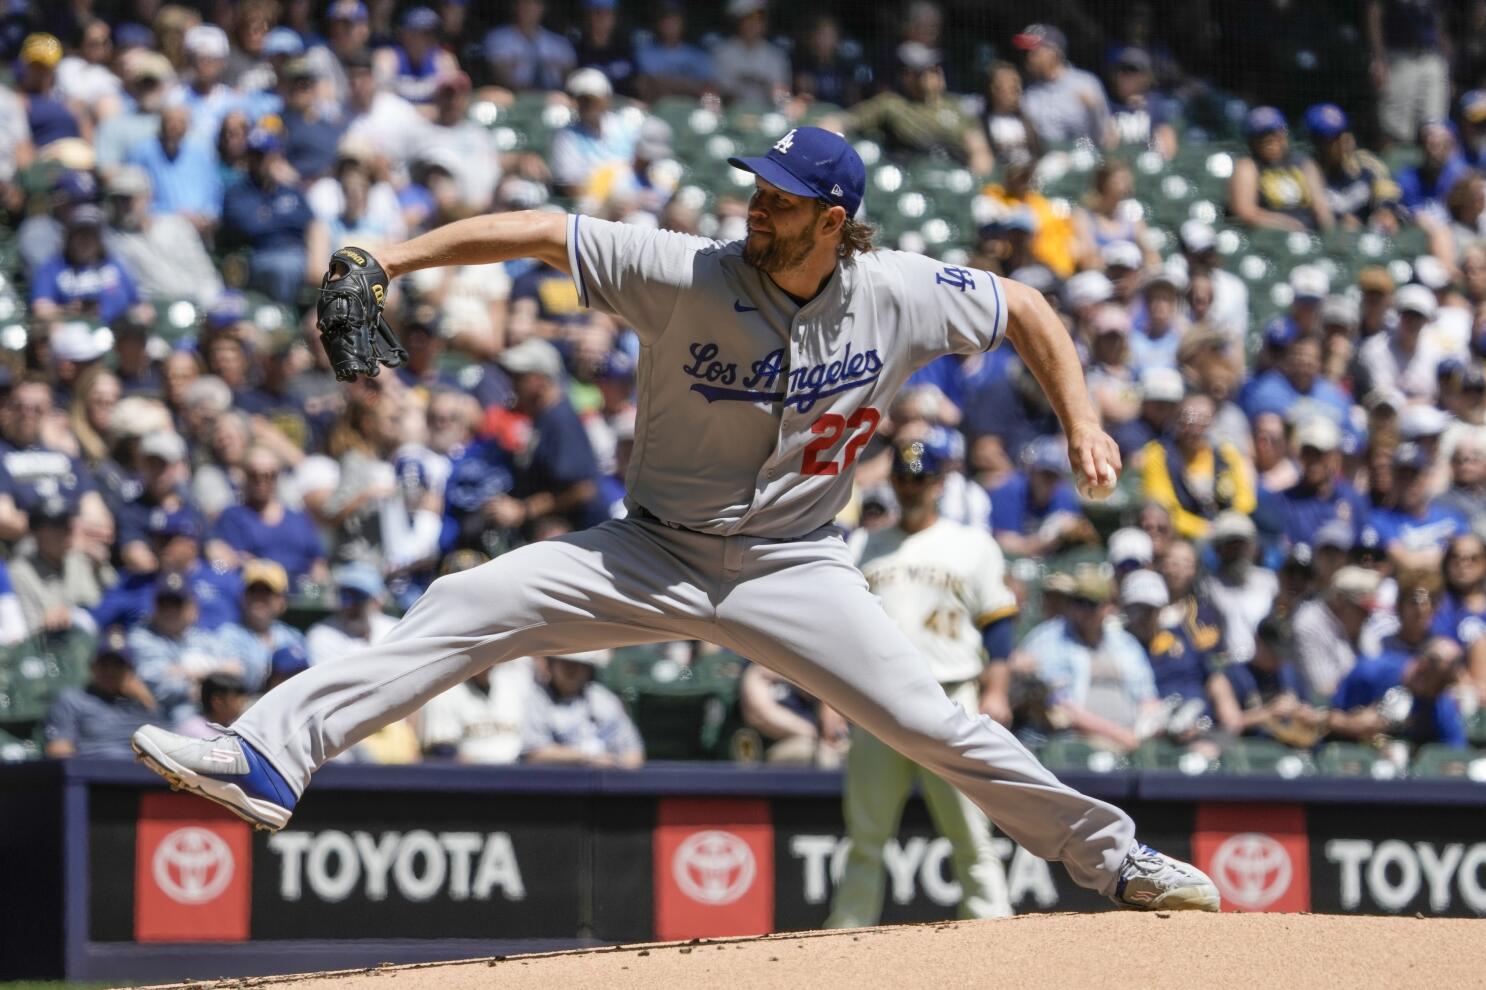 Dodgers Dugout: Here's why the Padres aren't the Dodgers' biggest